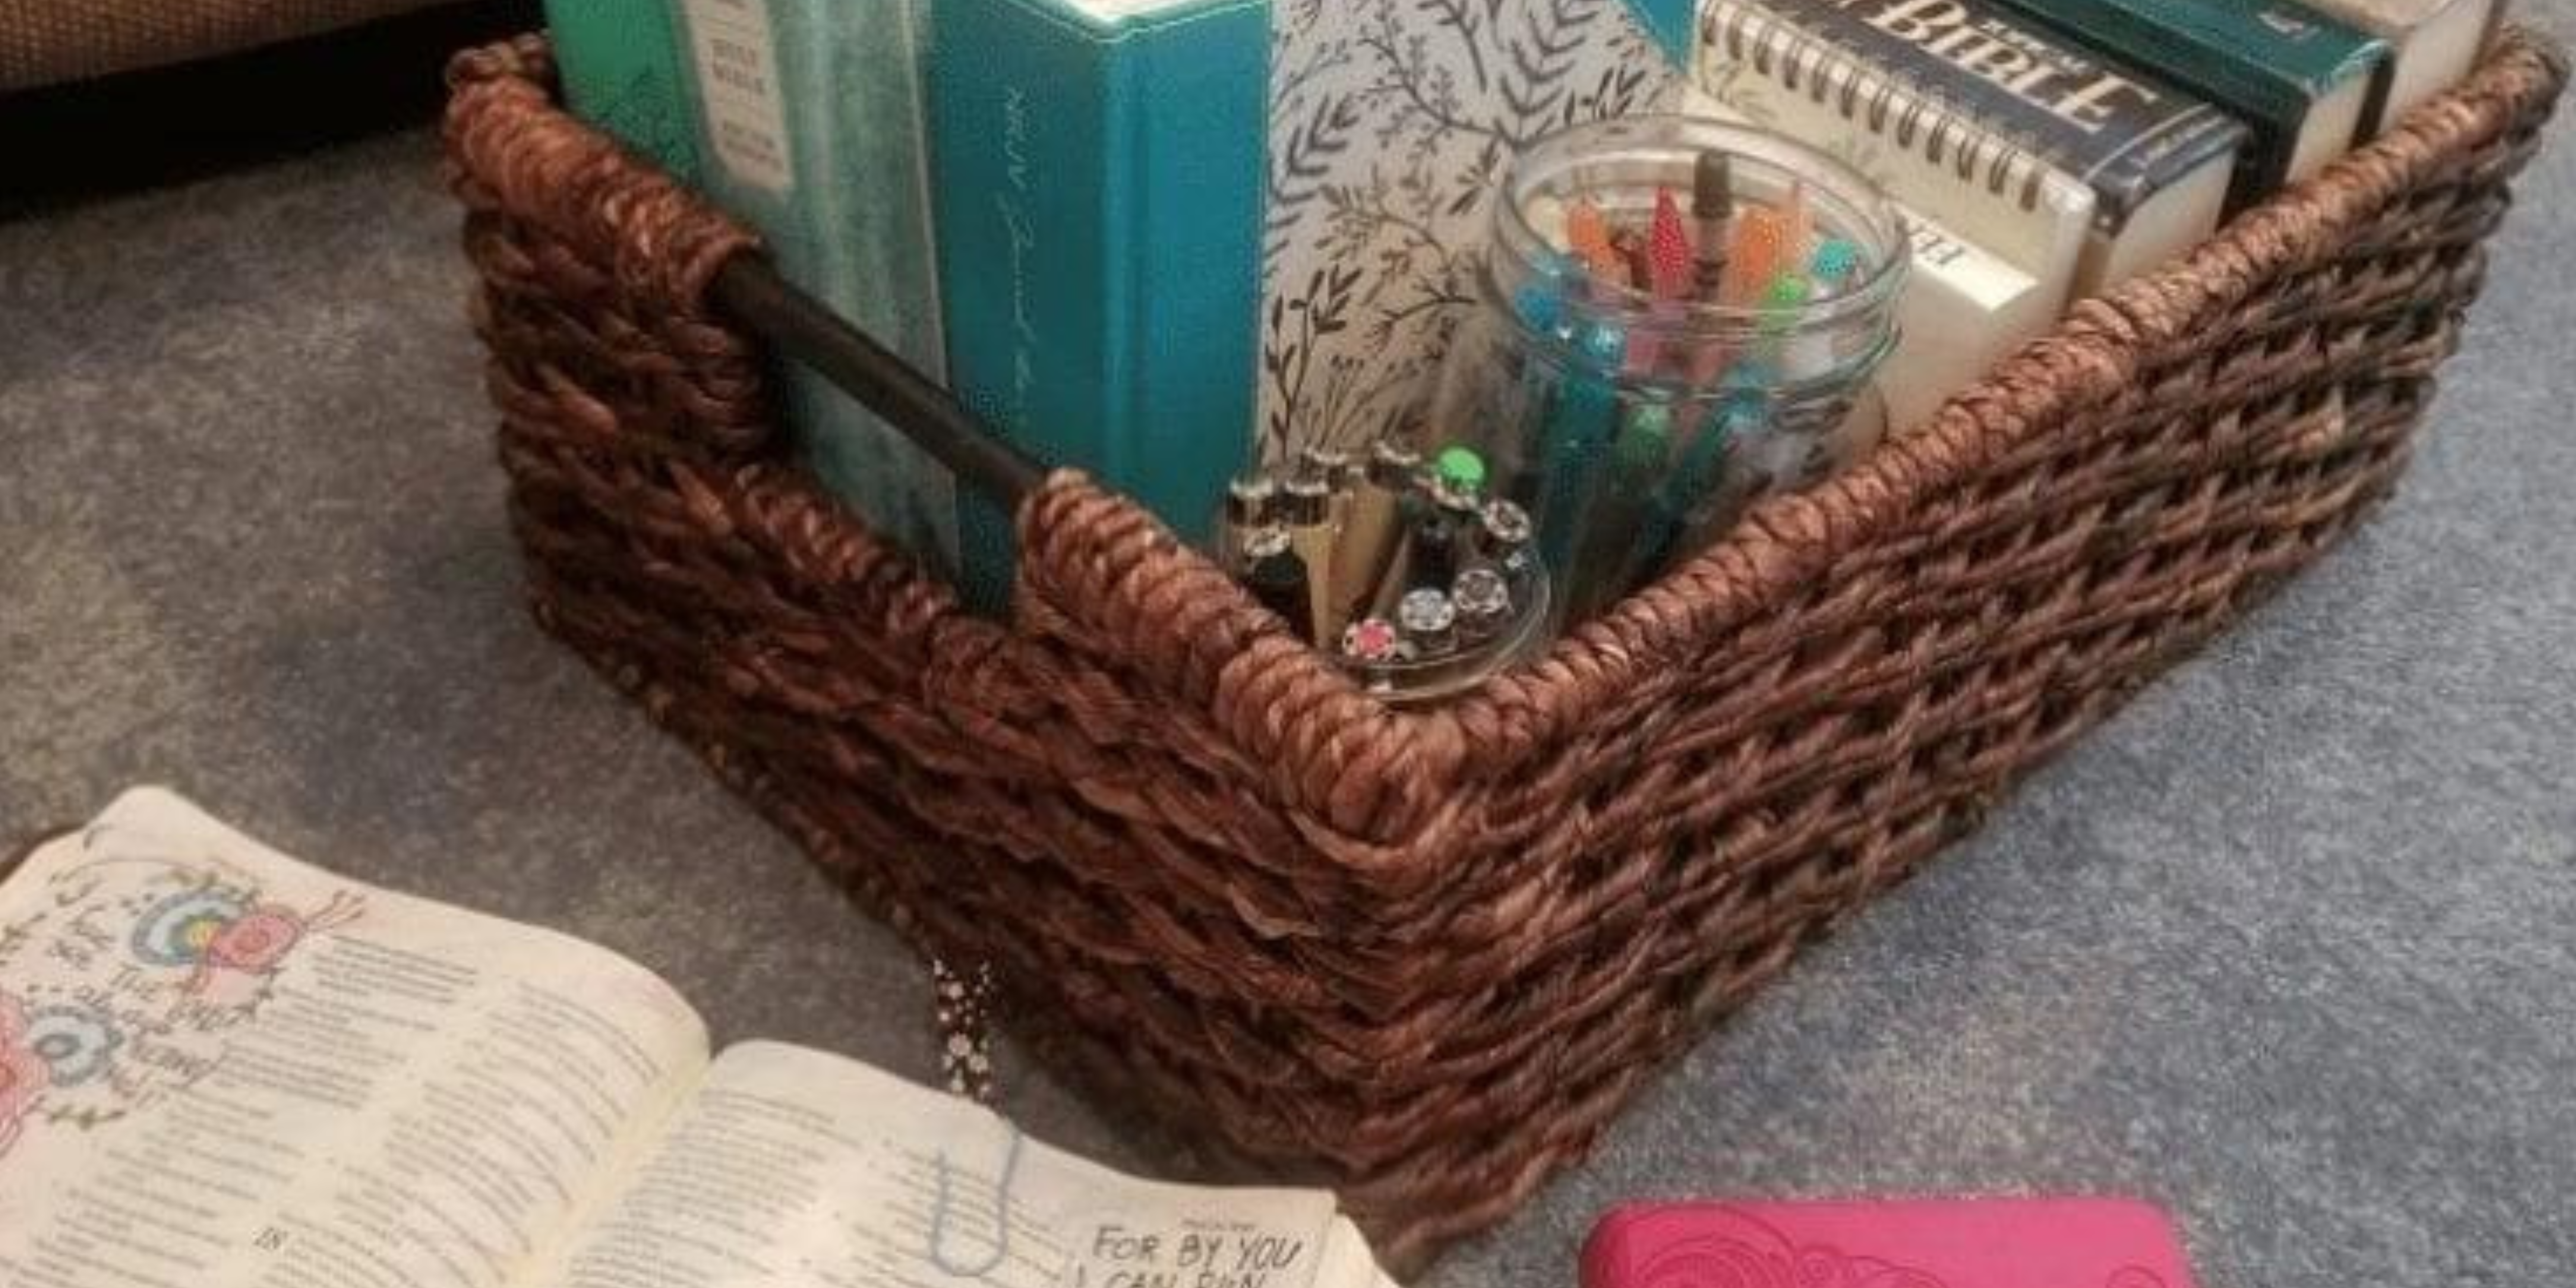 How To Make a Bible Journaling Basket for Your Quiet Time